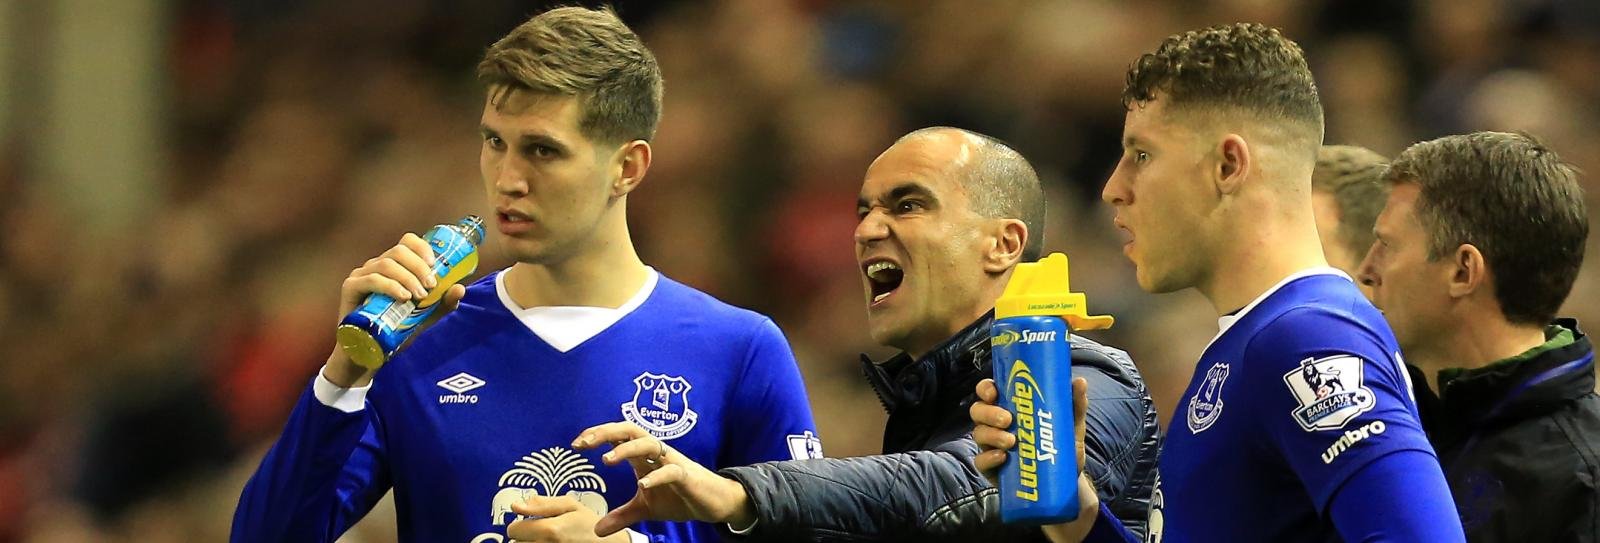 3 things we learnt from Everton’s disappointing 2015/16 Premier League season